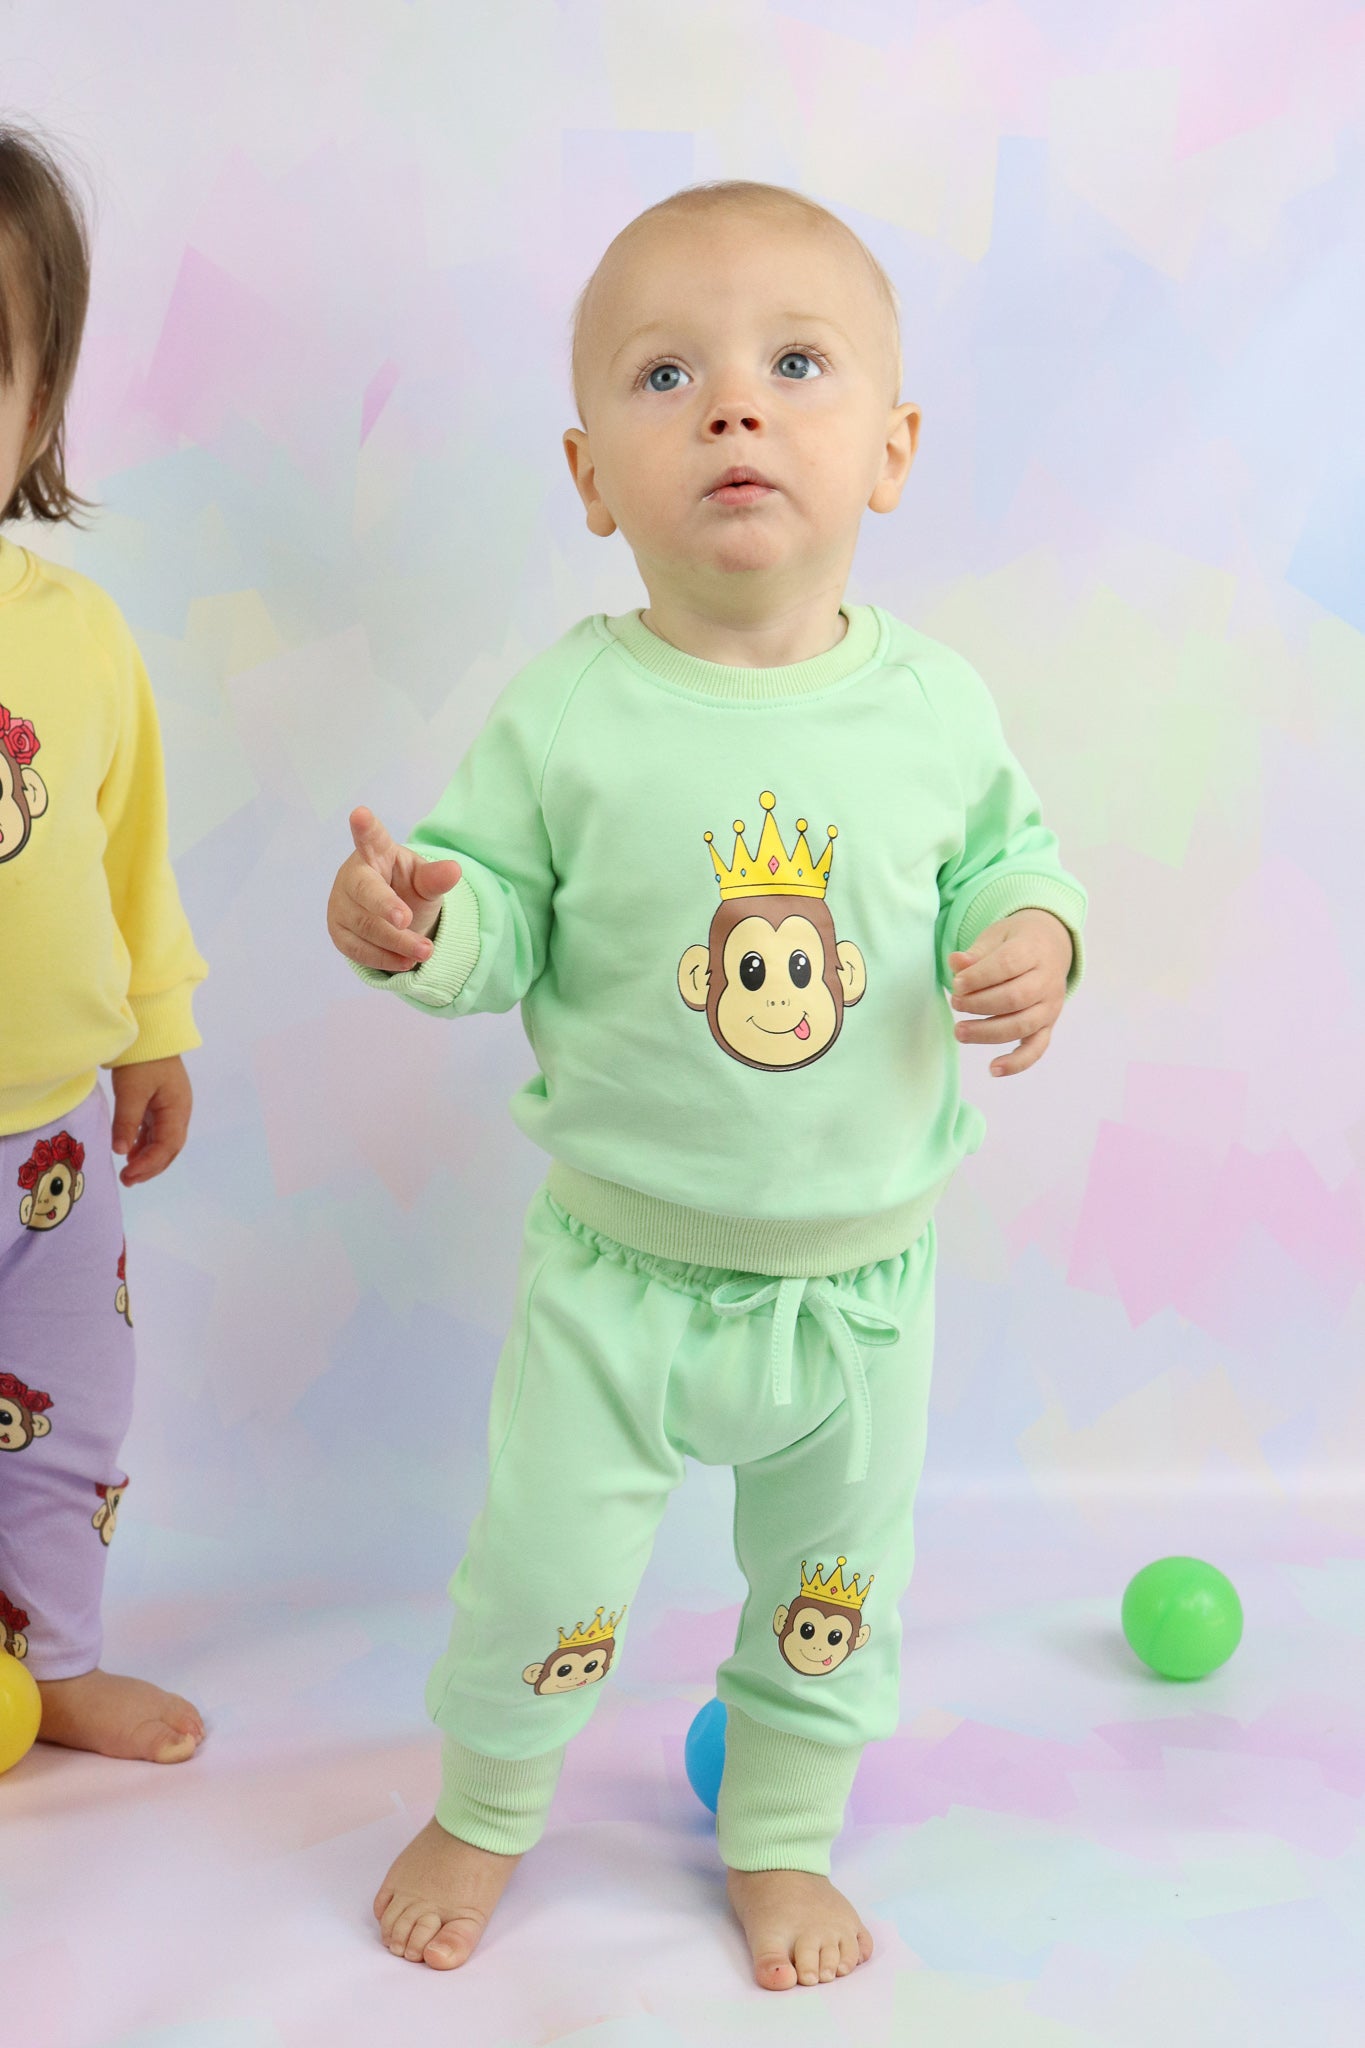 toddler boy standing up, wearing pastel green lounge set with cute monkey faces printed on it